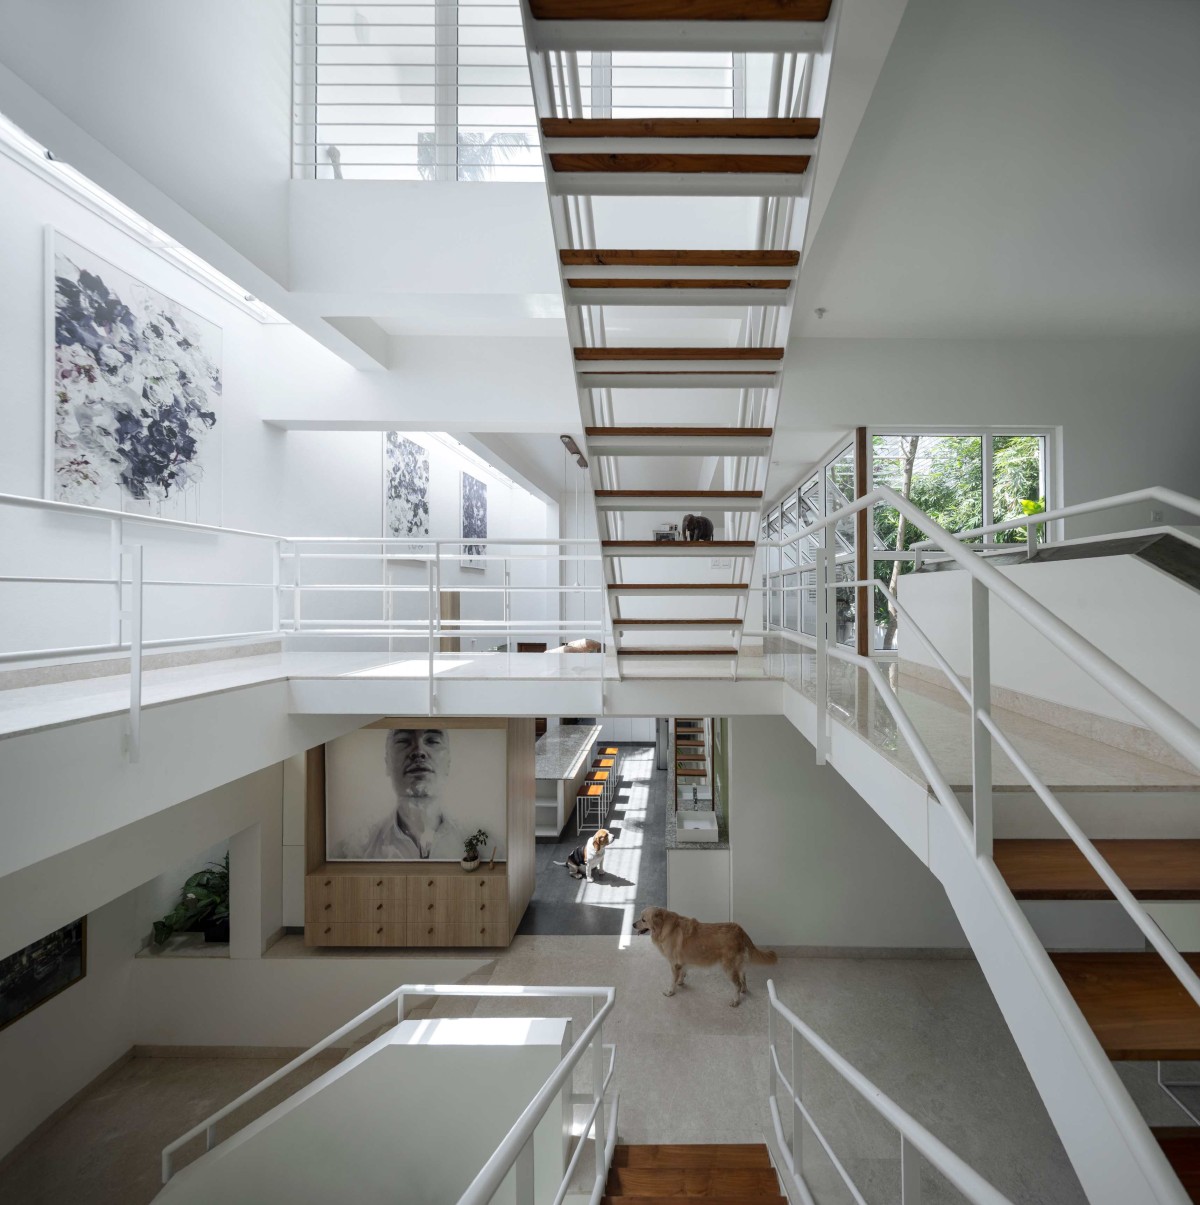 View from Staircase of Veiled House by Gaurav Roy Choudhury Architects